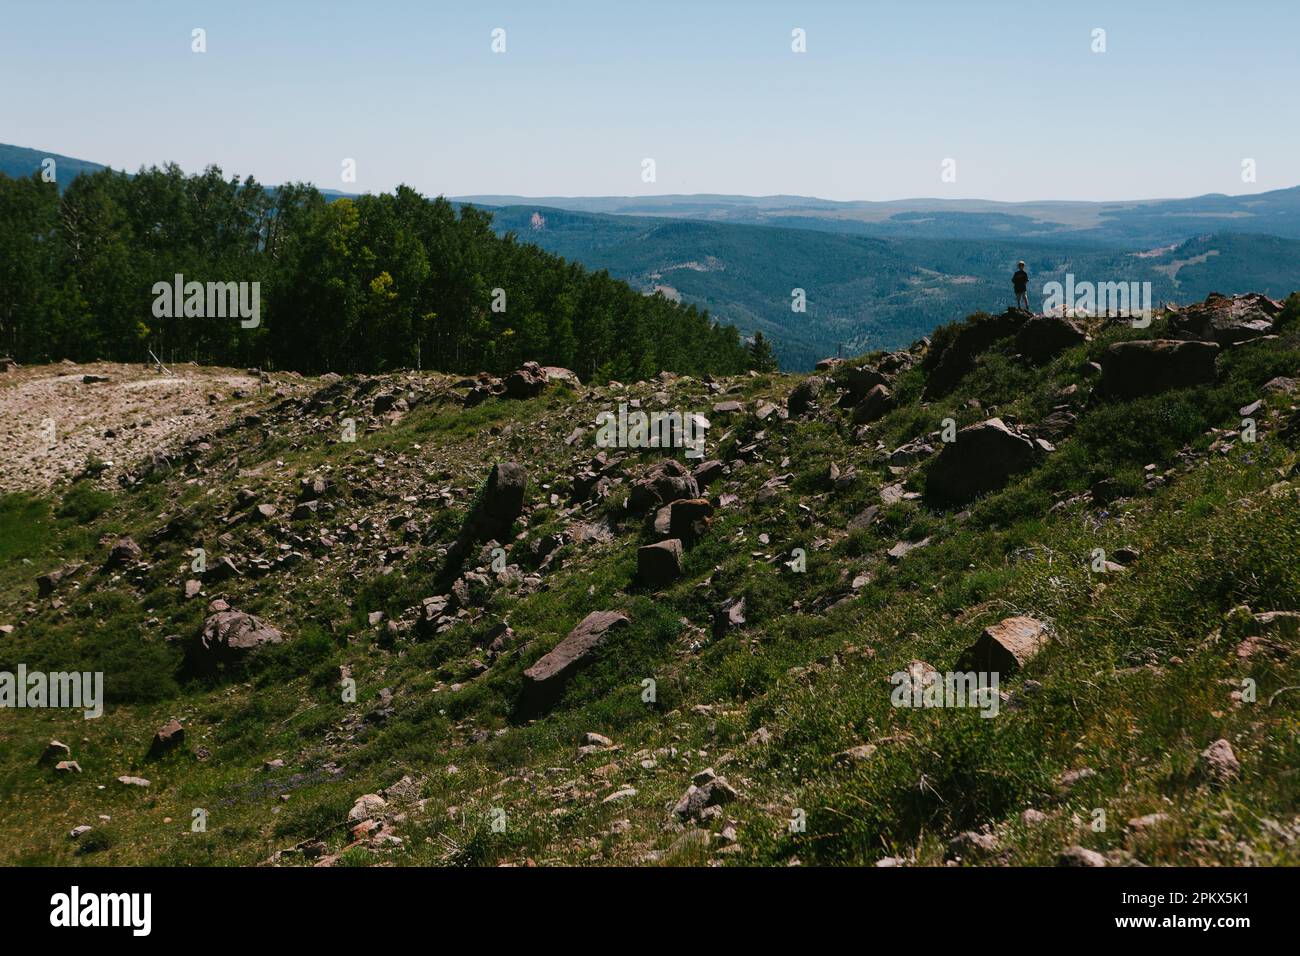 Boy standing on rocky hill looking down at valley in mountain hike Stock Photo